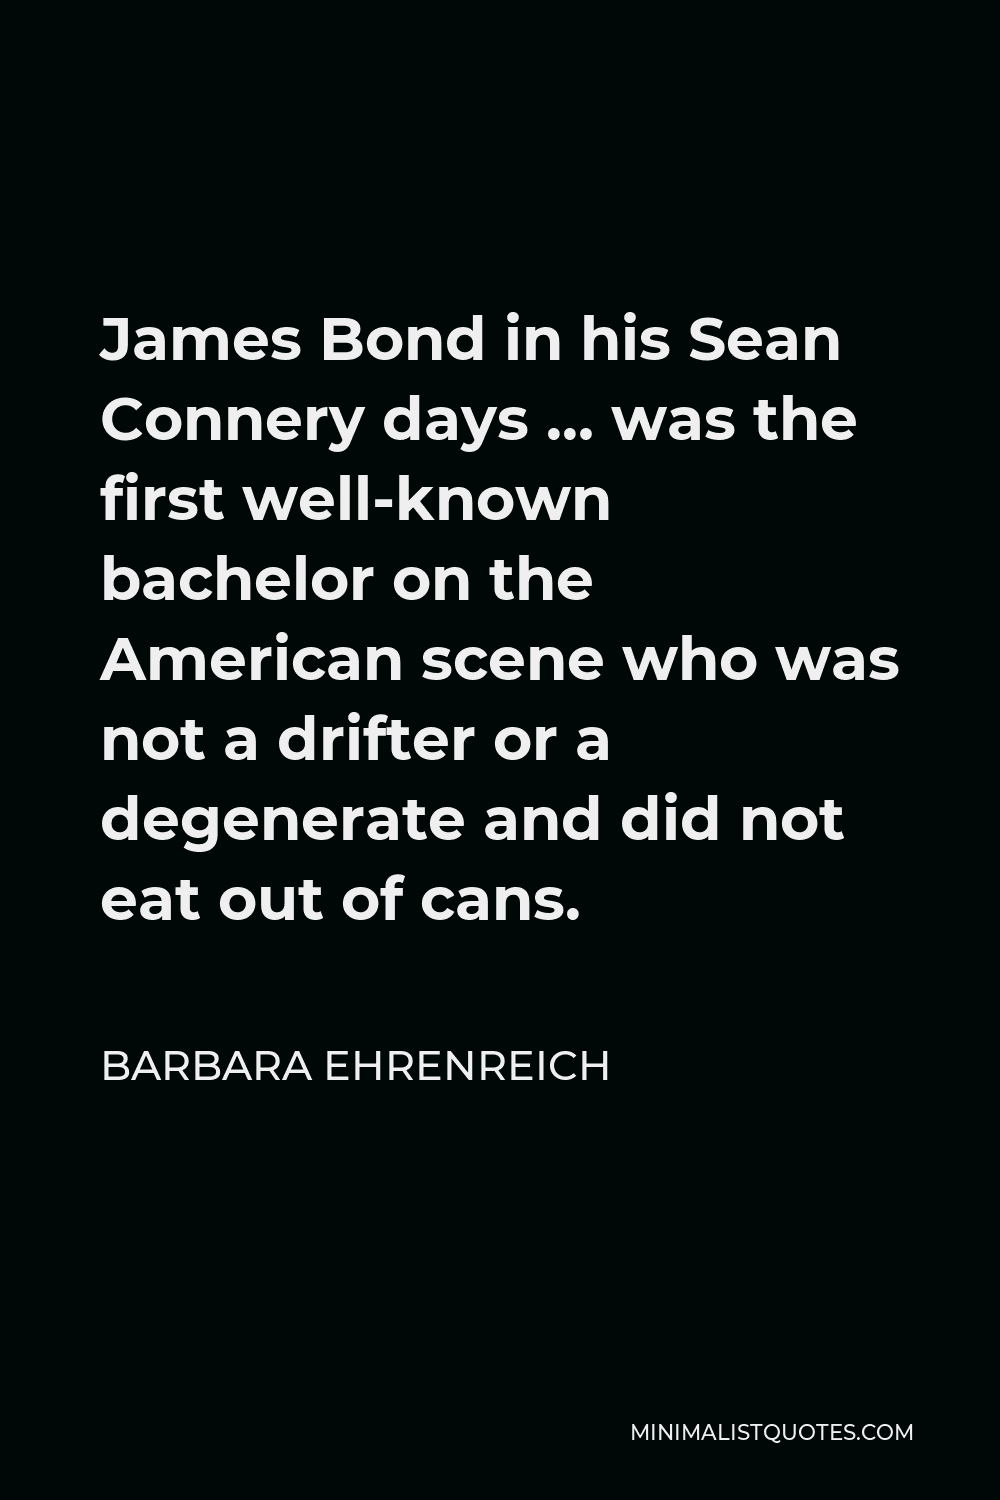 Barbara Ehrenreich Quote - James Bond in his Sean Connery days … was the first well-known bachelor on the American scene who was not a drifter or a degenerate and did not eat out of cans.